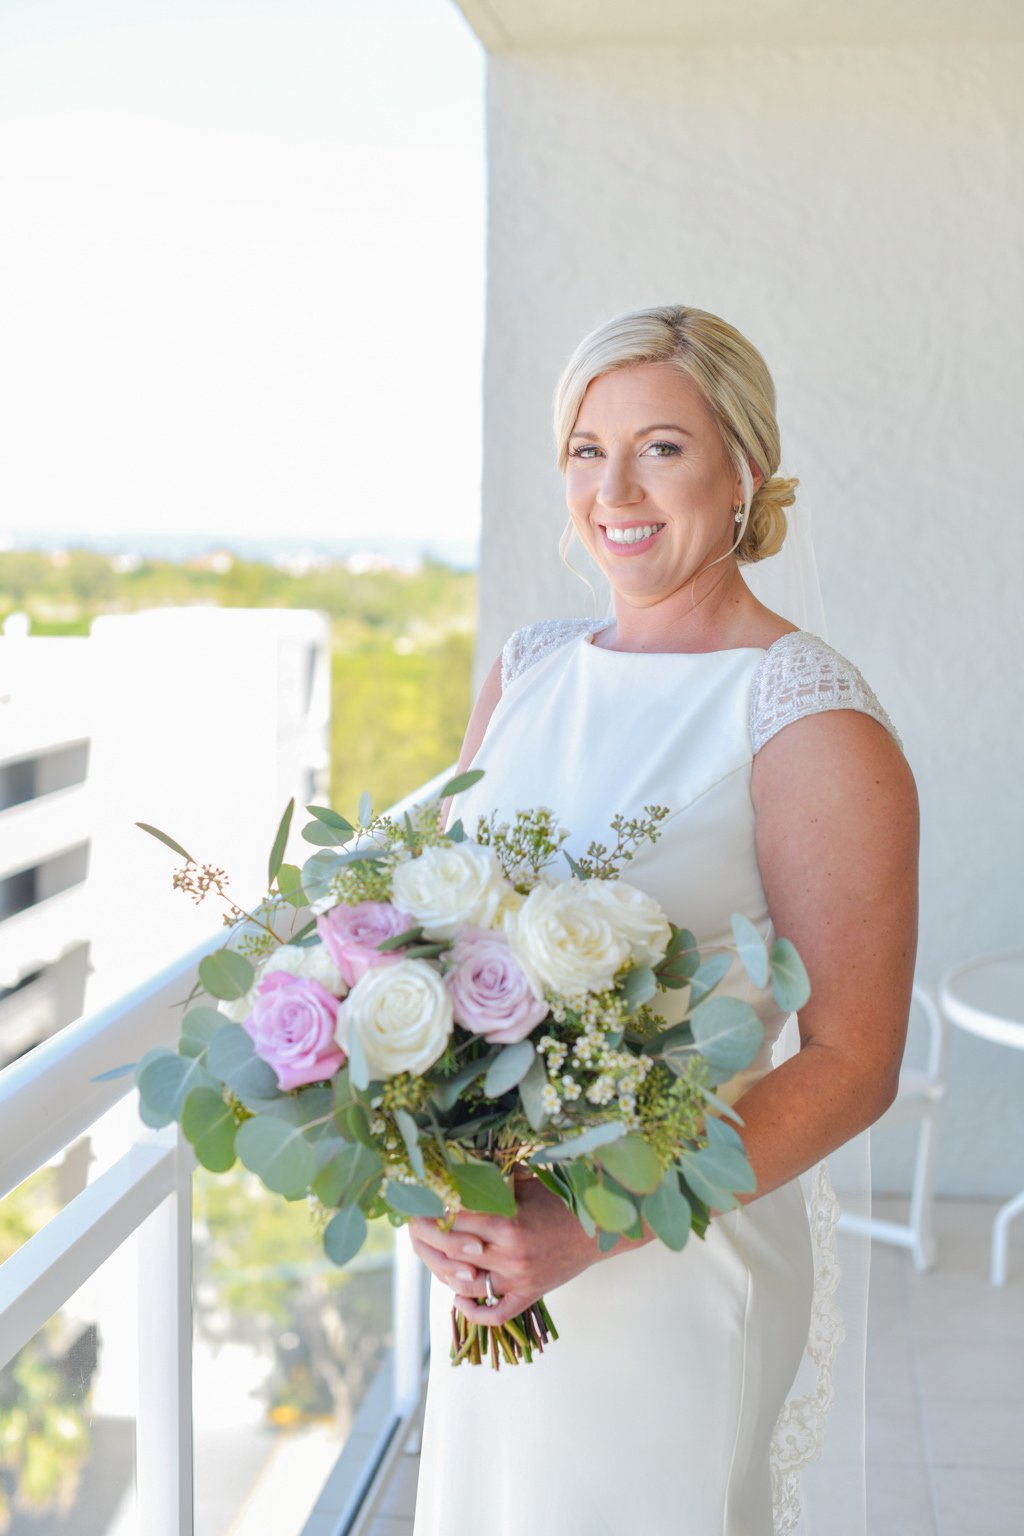 Florida Bride in Fitted White Cap Sleeve High Neckline Christina Wu Wedding Dress Holding Garden Organic White, Ivory, Purple Roses, Silver Dollar Eucalyptus and Greenery Floral Bouquet Wedding Portrait